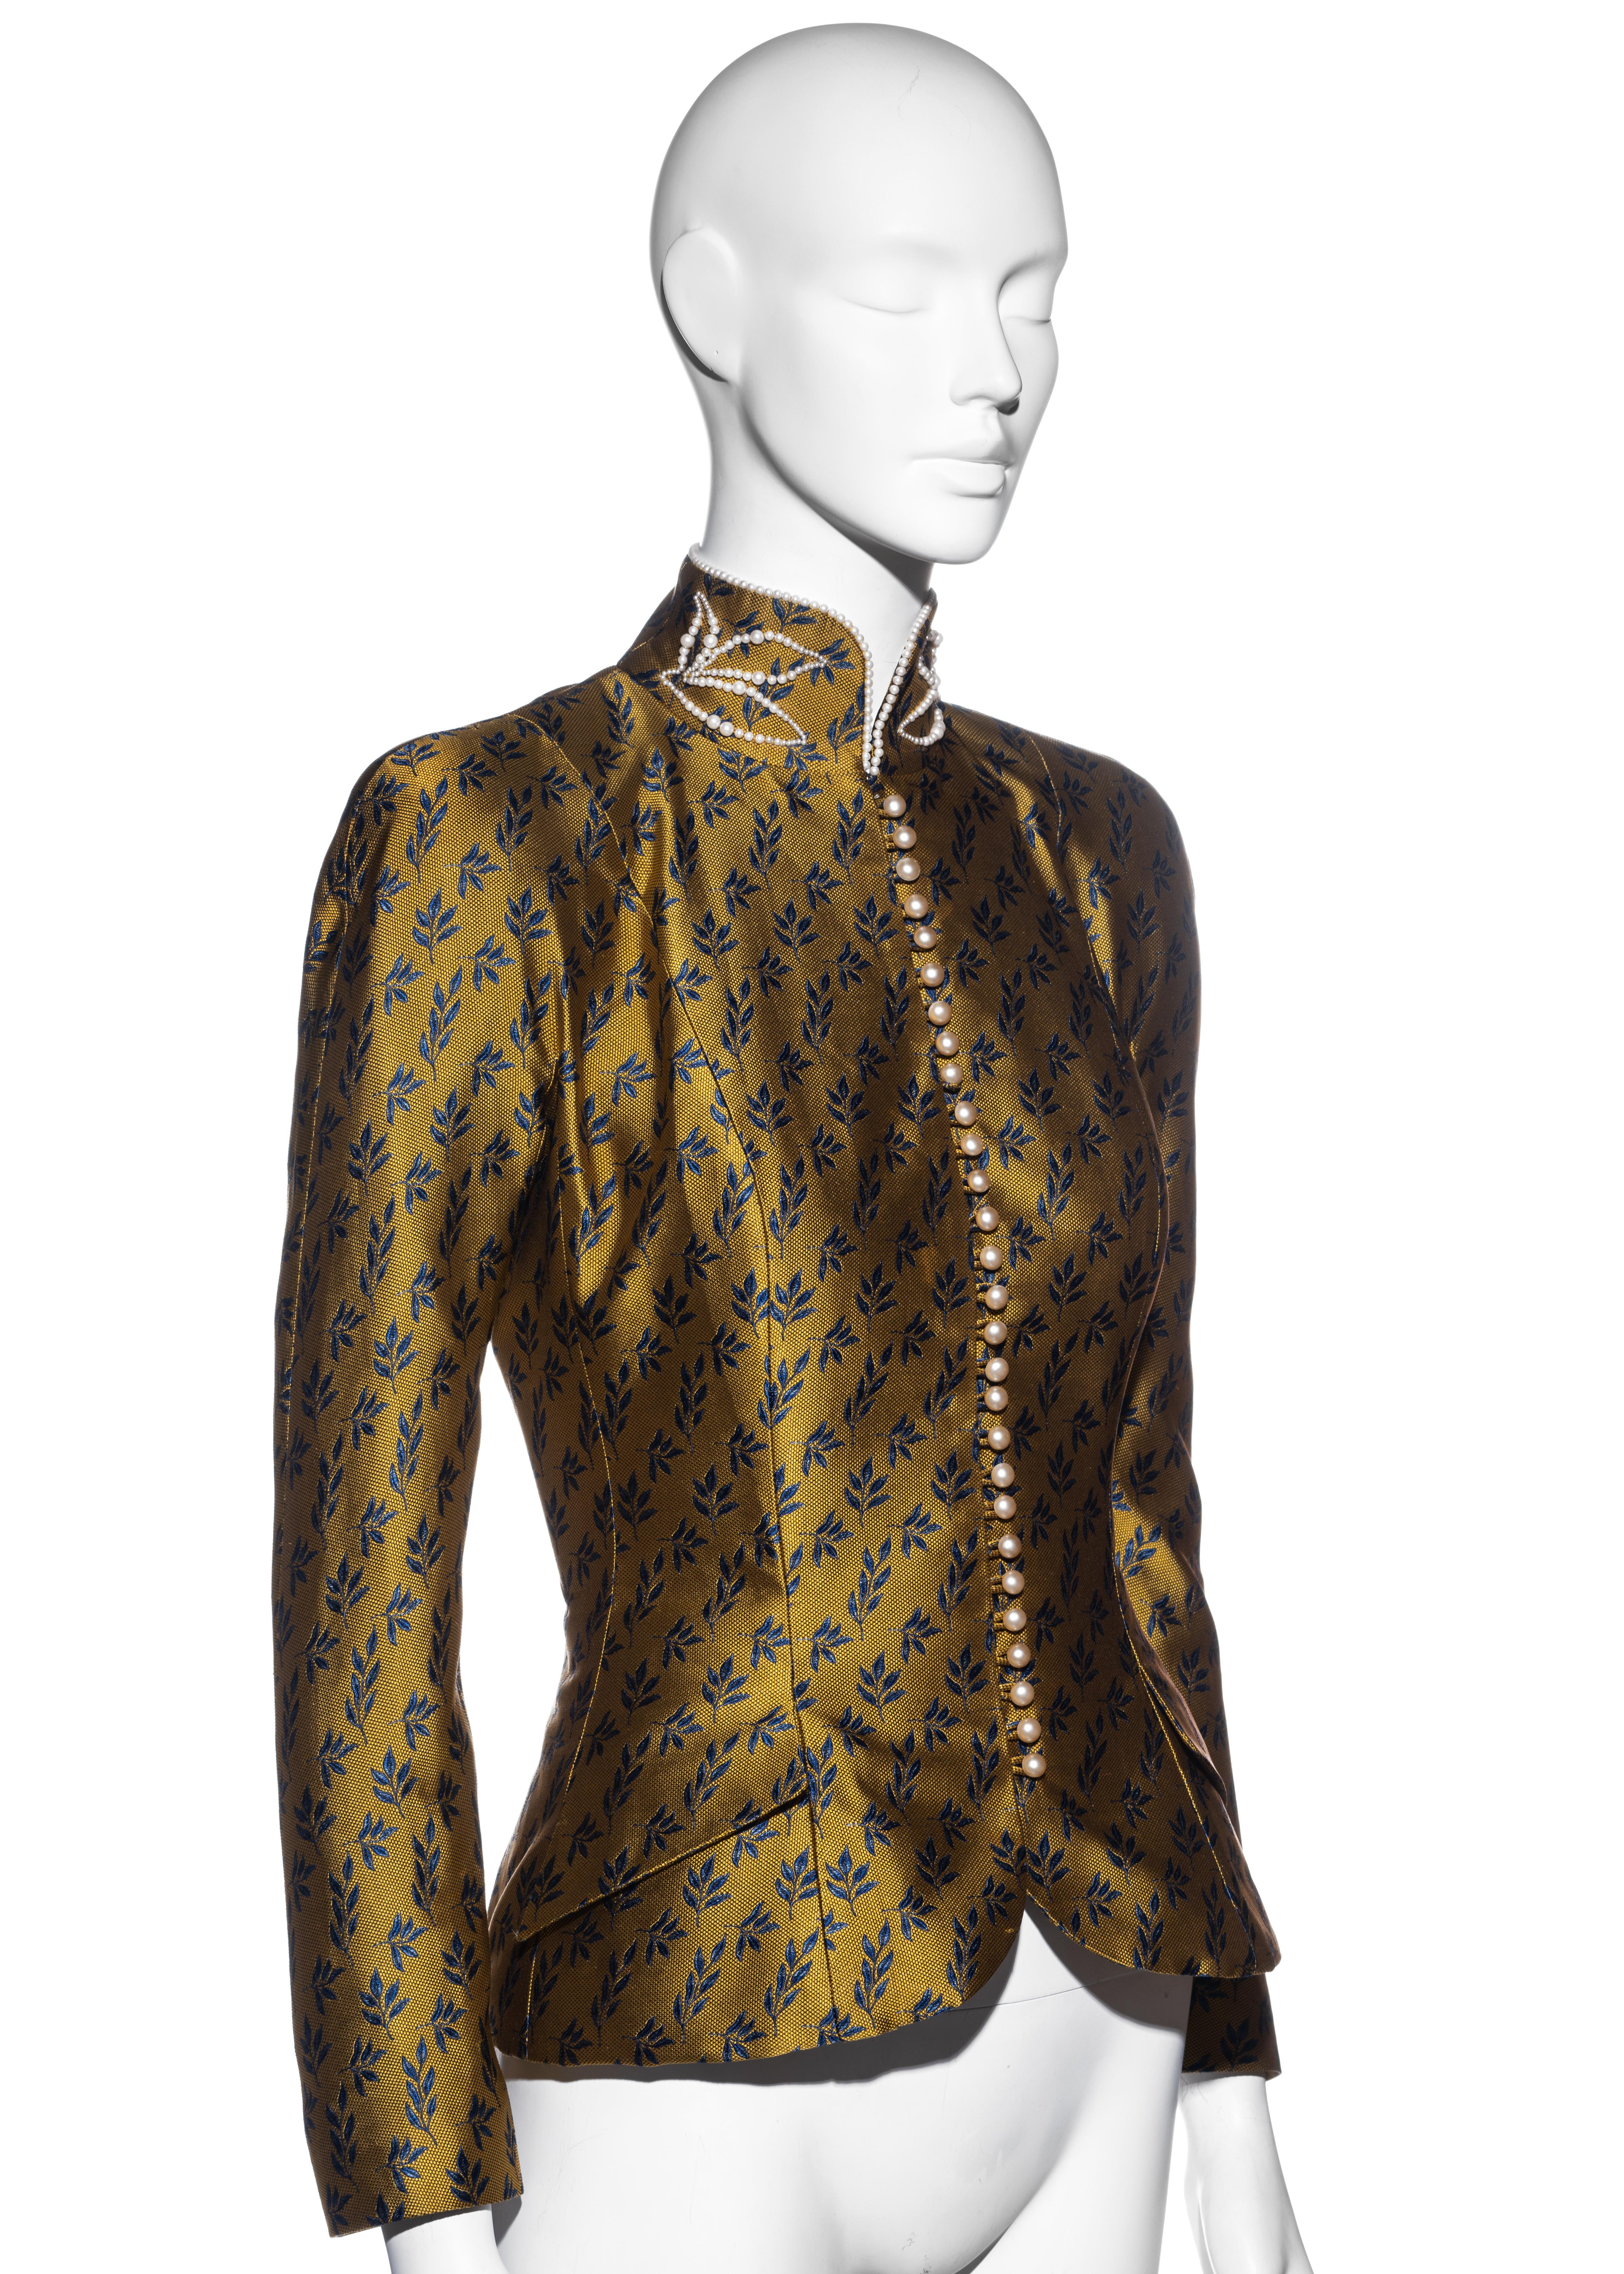 Christian Dior by John Galliano gold satin jacquard fitted jacket, fw 1997 3